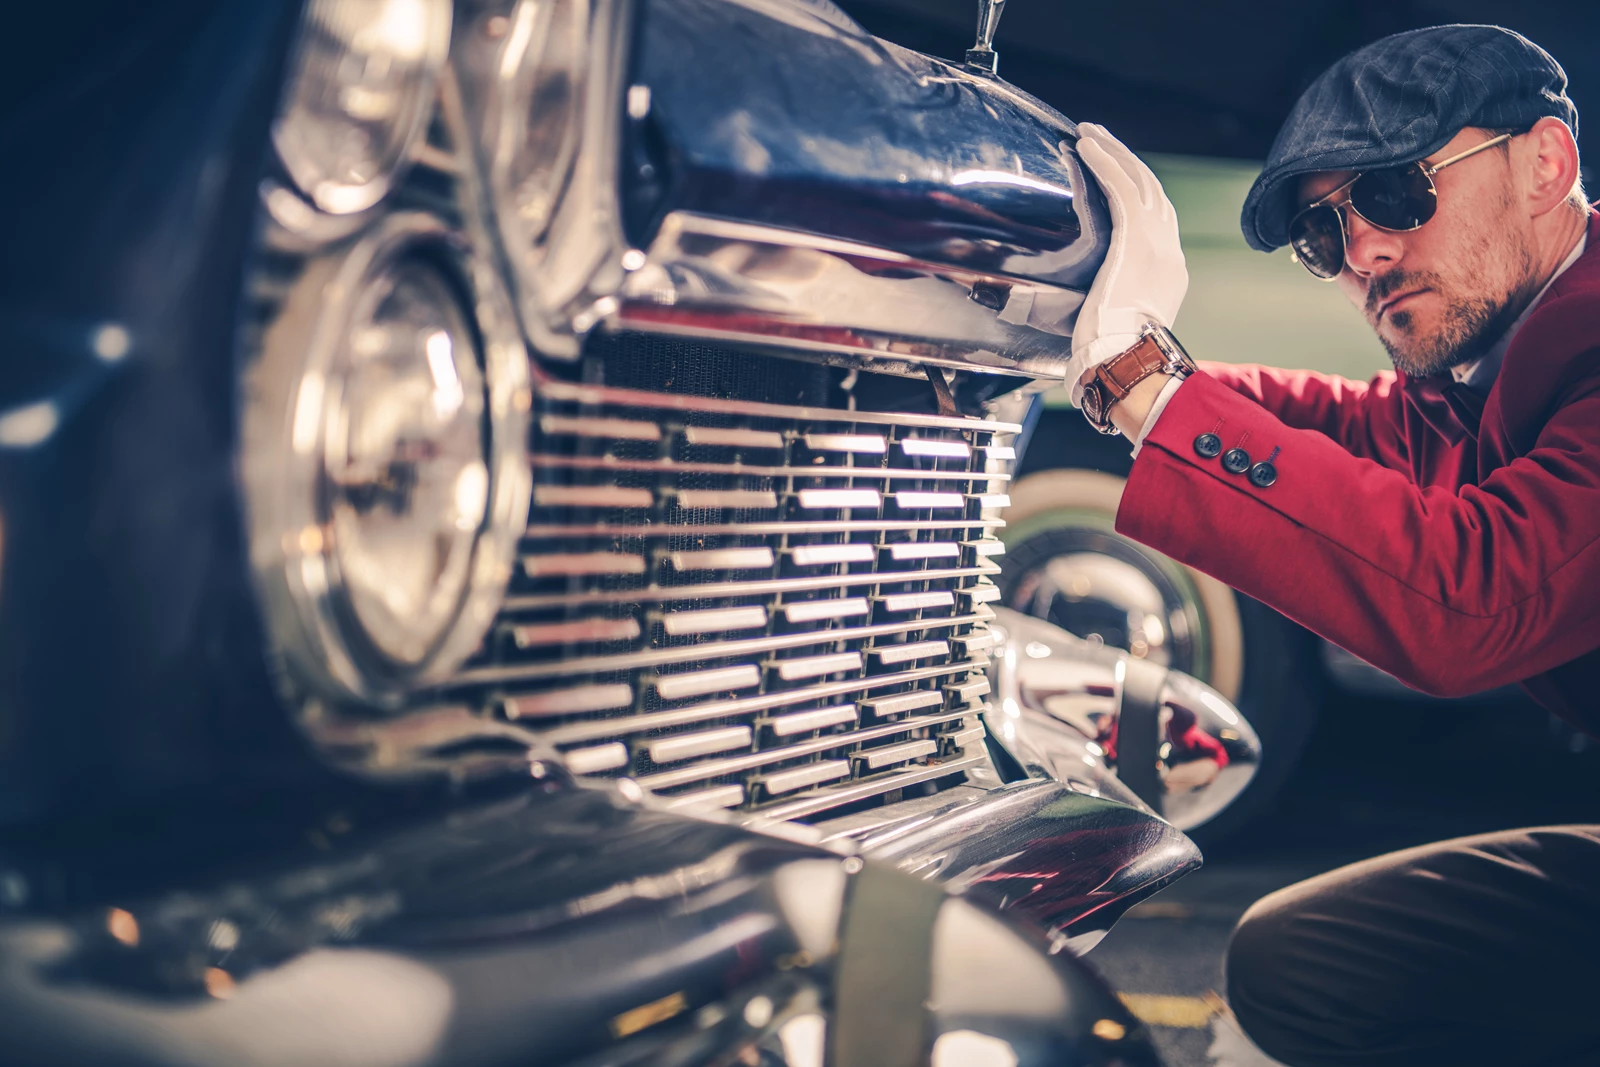 A vintage car restorer inspecting the front of a classic car